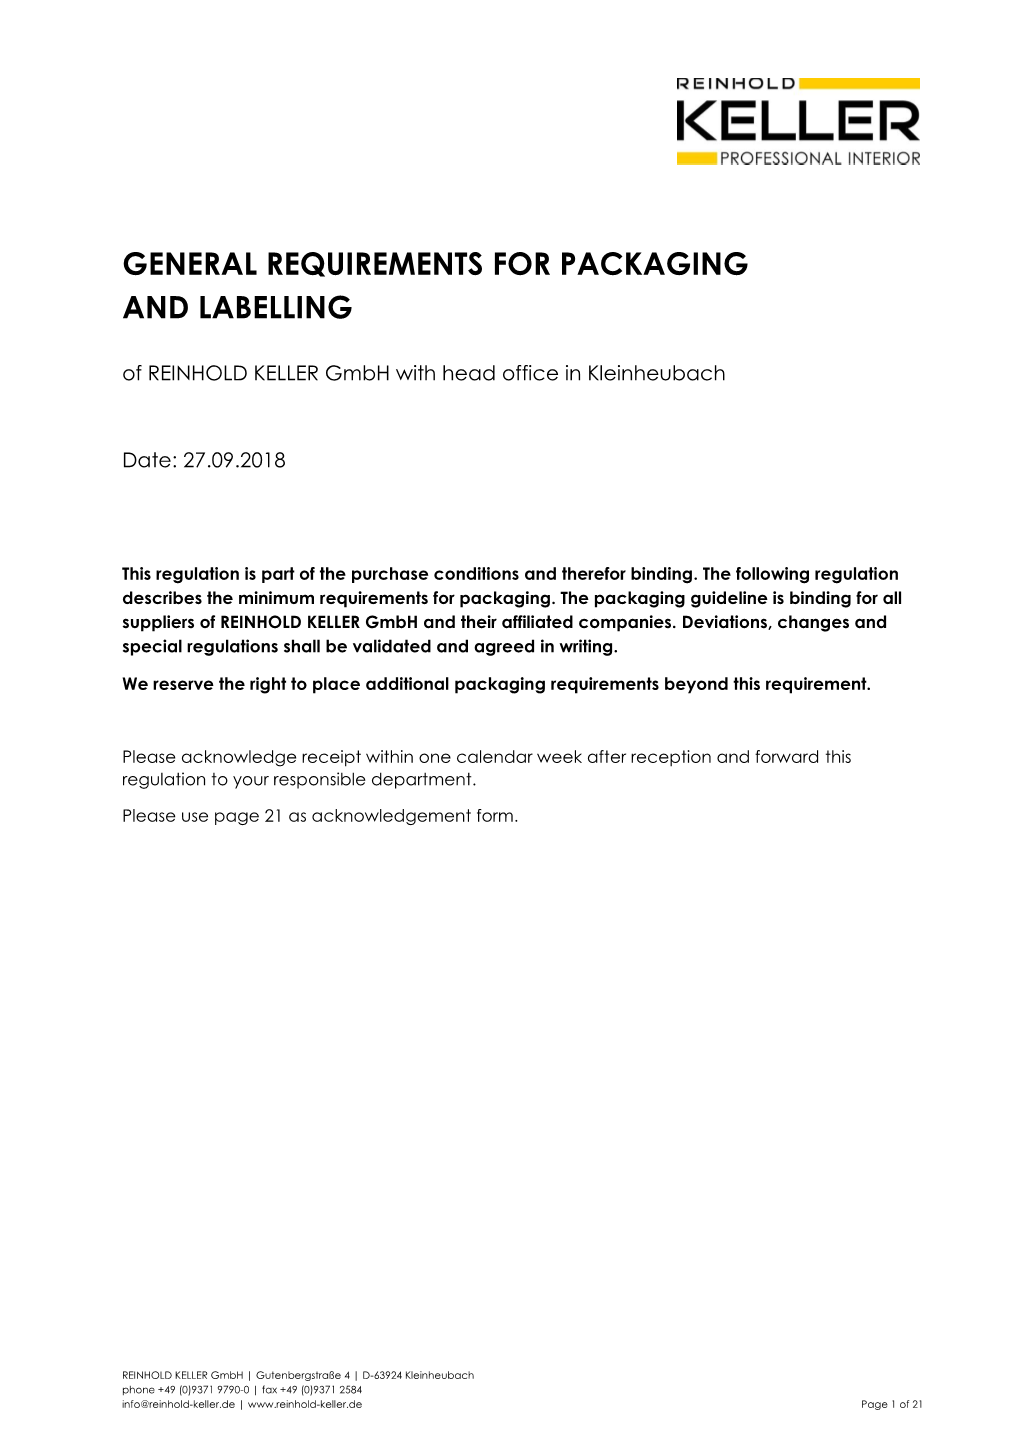 GENERAL REQUIREMENTS for PACKAGING and LABELLING of REINHOLD KELLER Gmbh with Head Office in Kleinheubach